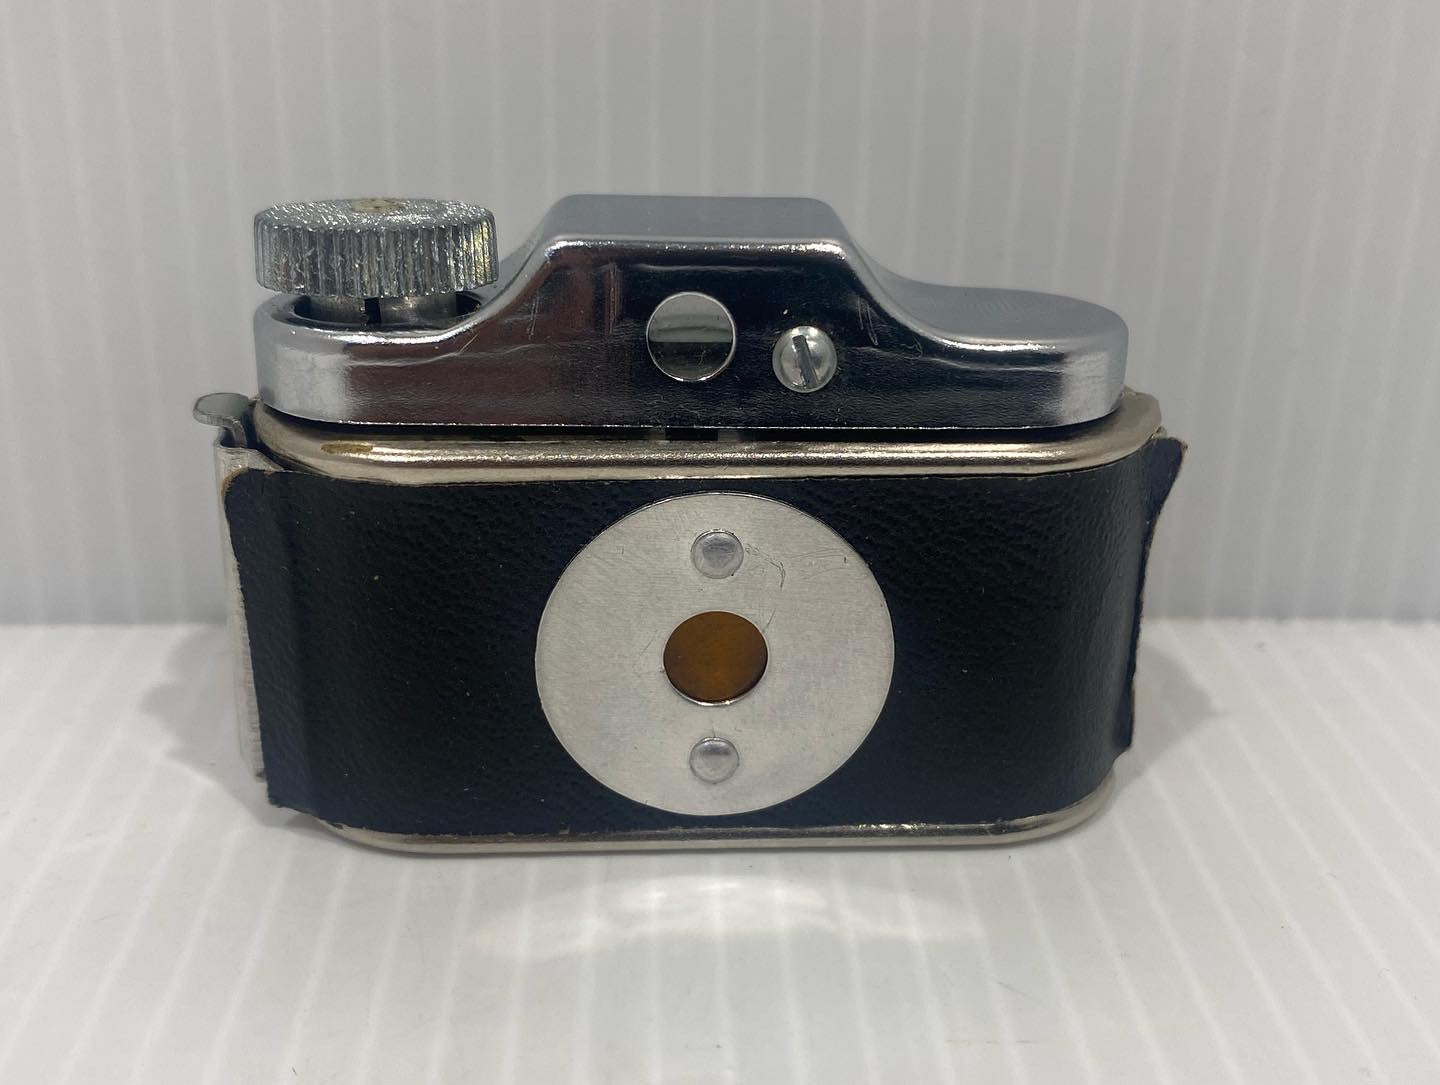 Vintage 1950's Miniature Crystar Spy Camera With original box. Made in Japan!